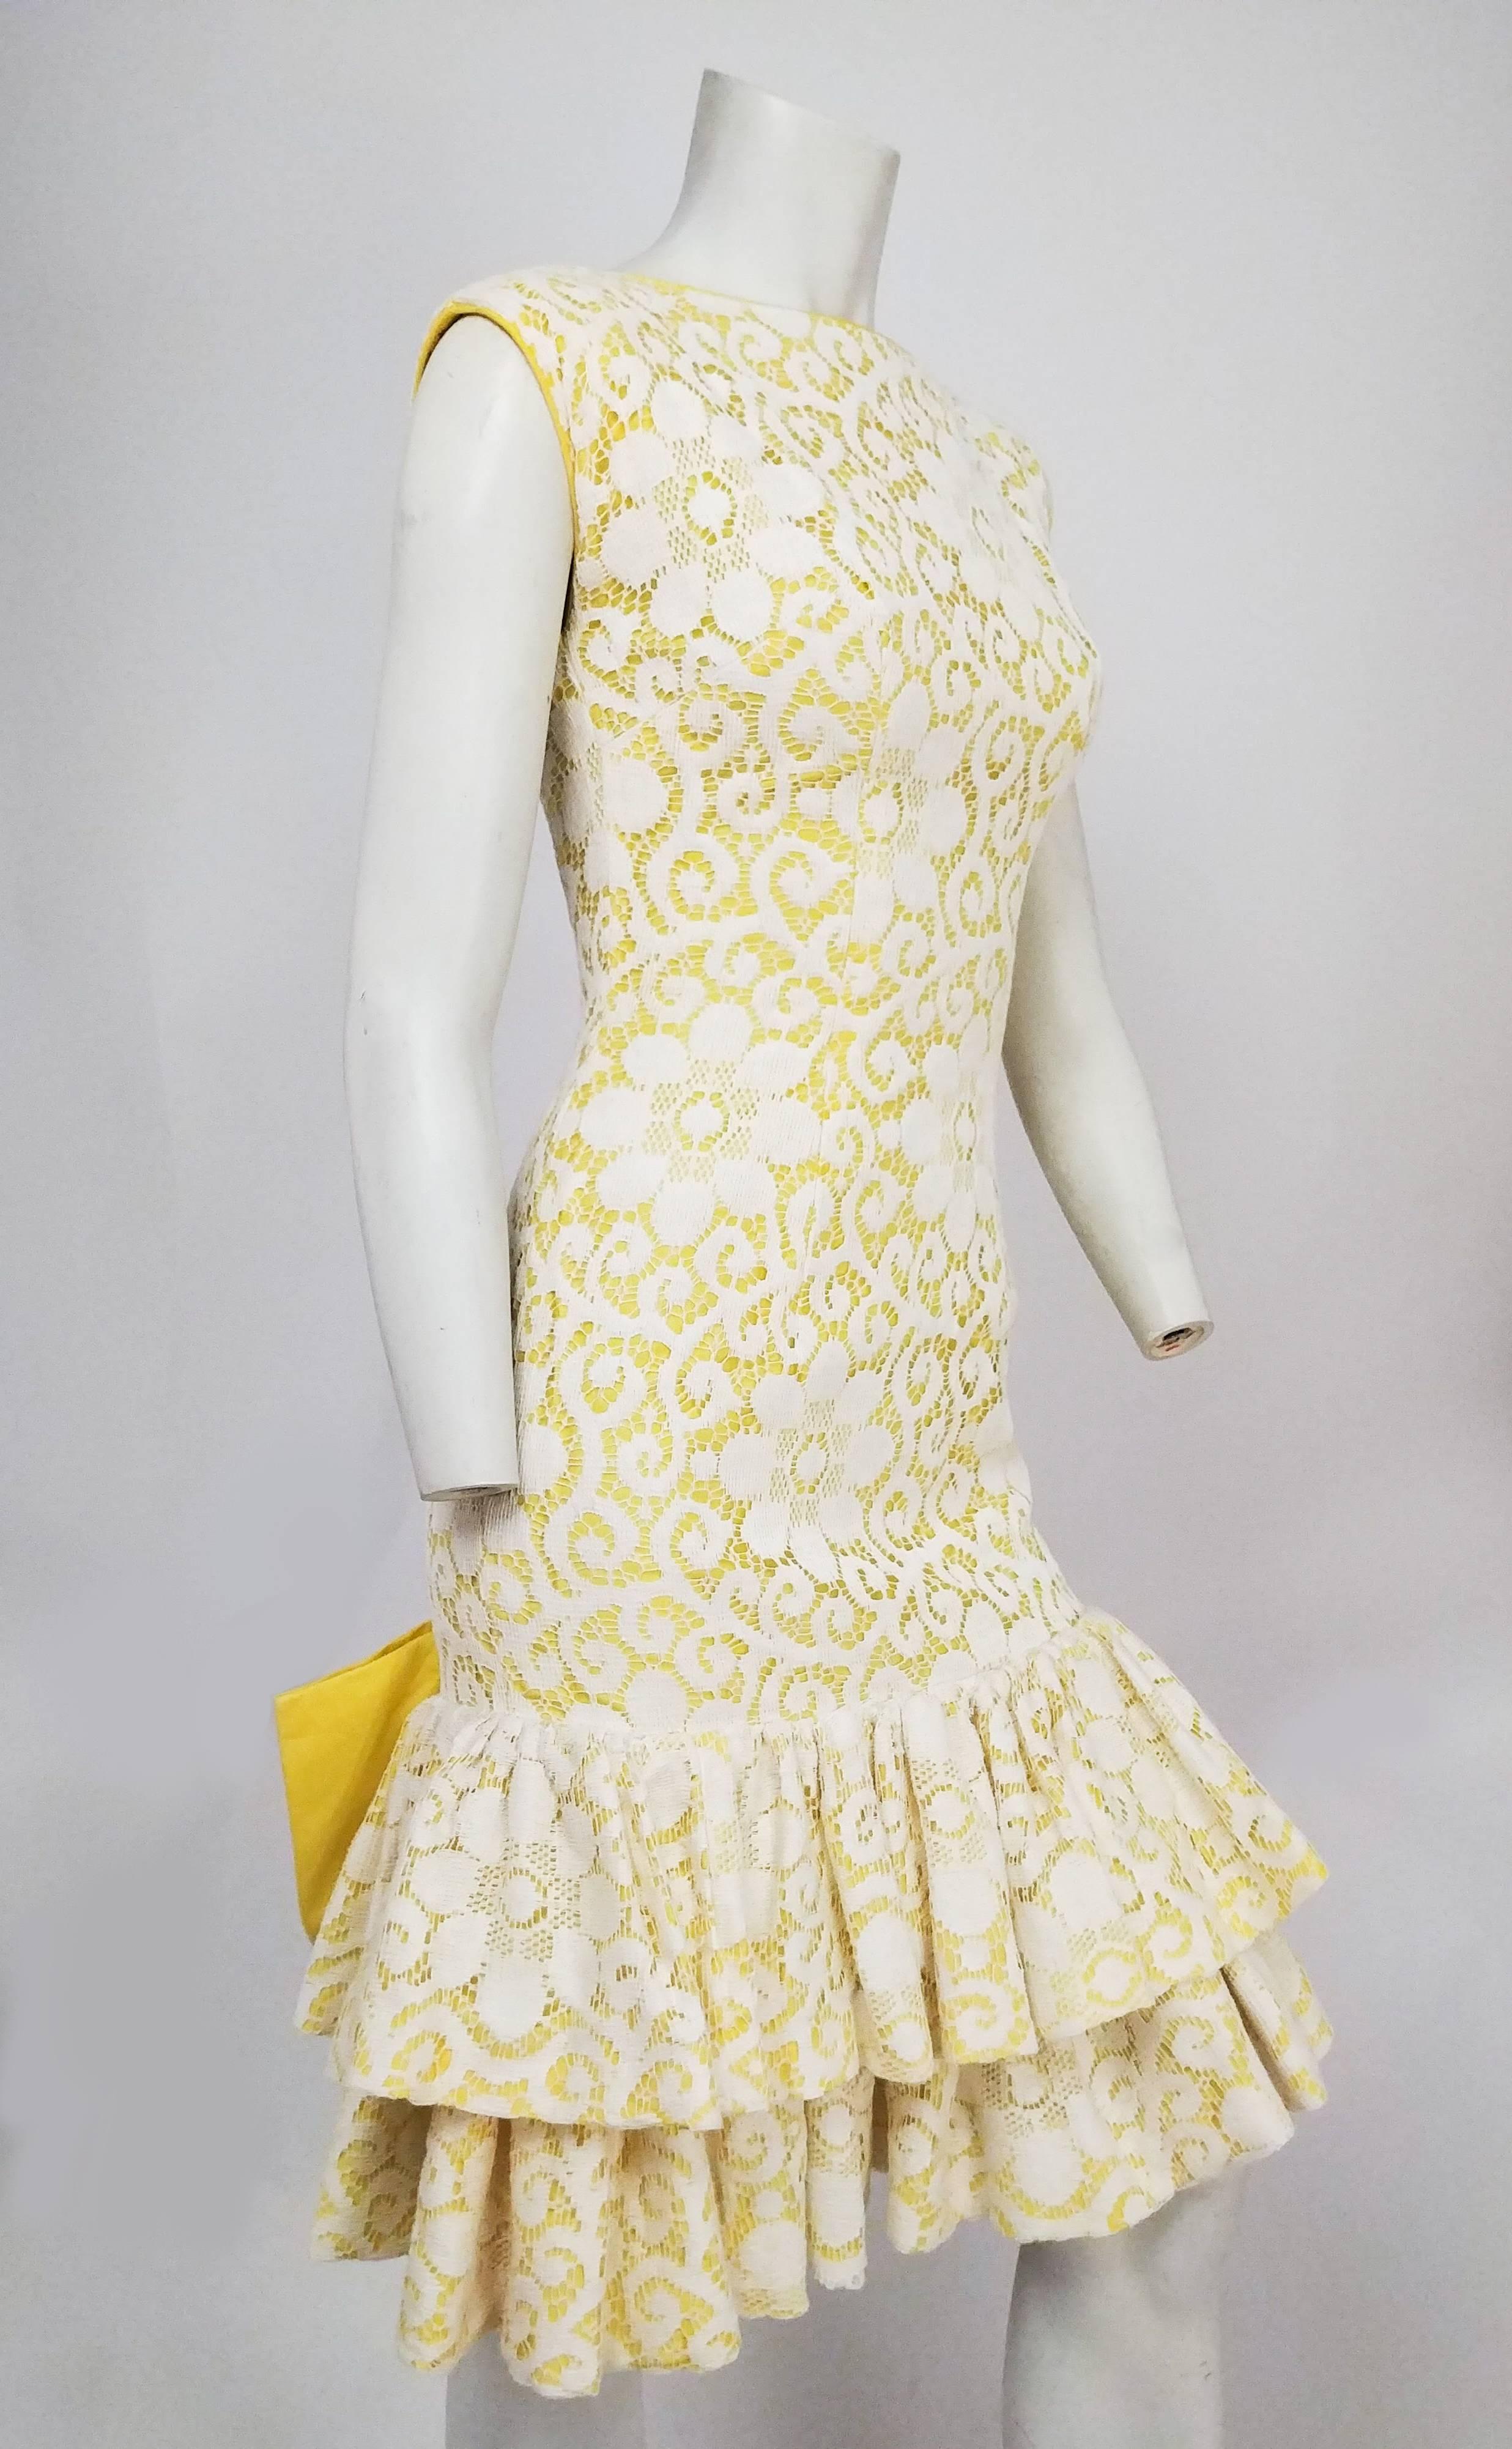 1960s Lilli Diamond Yellow Drop-waist Ruffle Cocktail Dress w/ Lace Overlay. Yellow base with white lace overlay, double tier of ruffled hem, and large bow at back. Low cut back. 